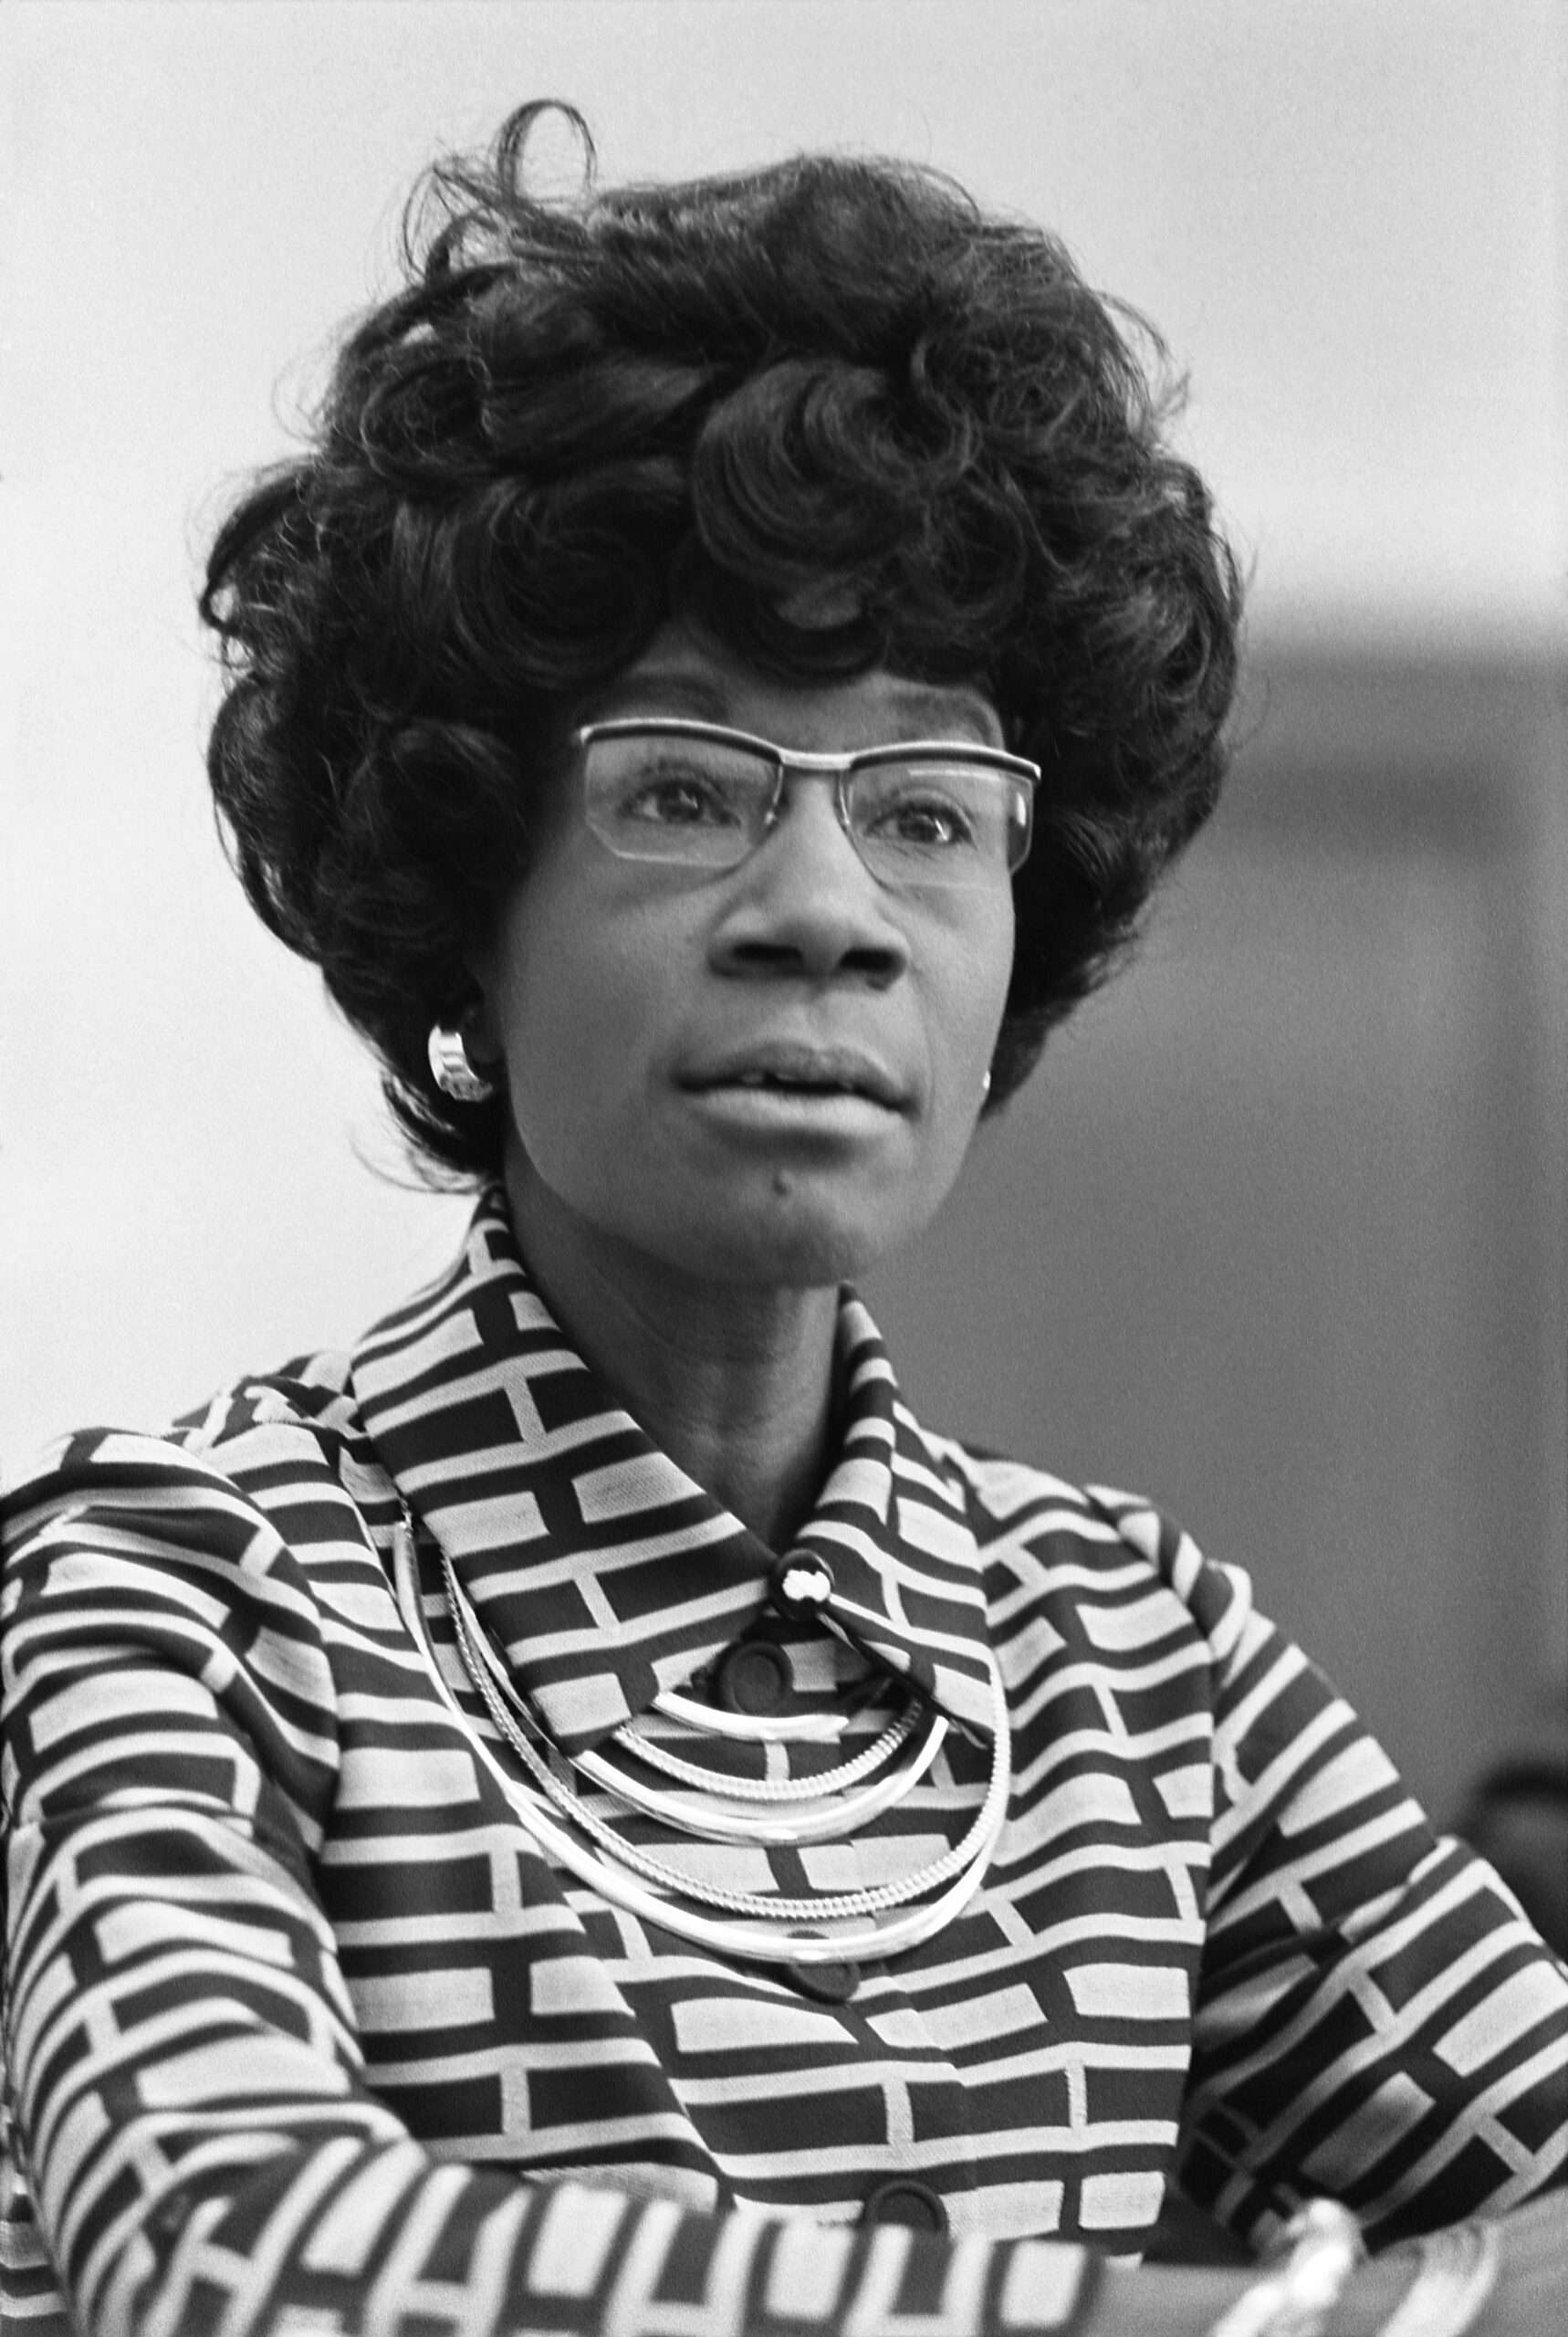 Photograph of Shirley Chisholm sitting at a press conference.